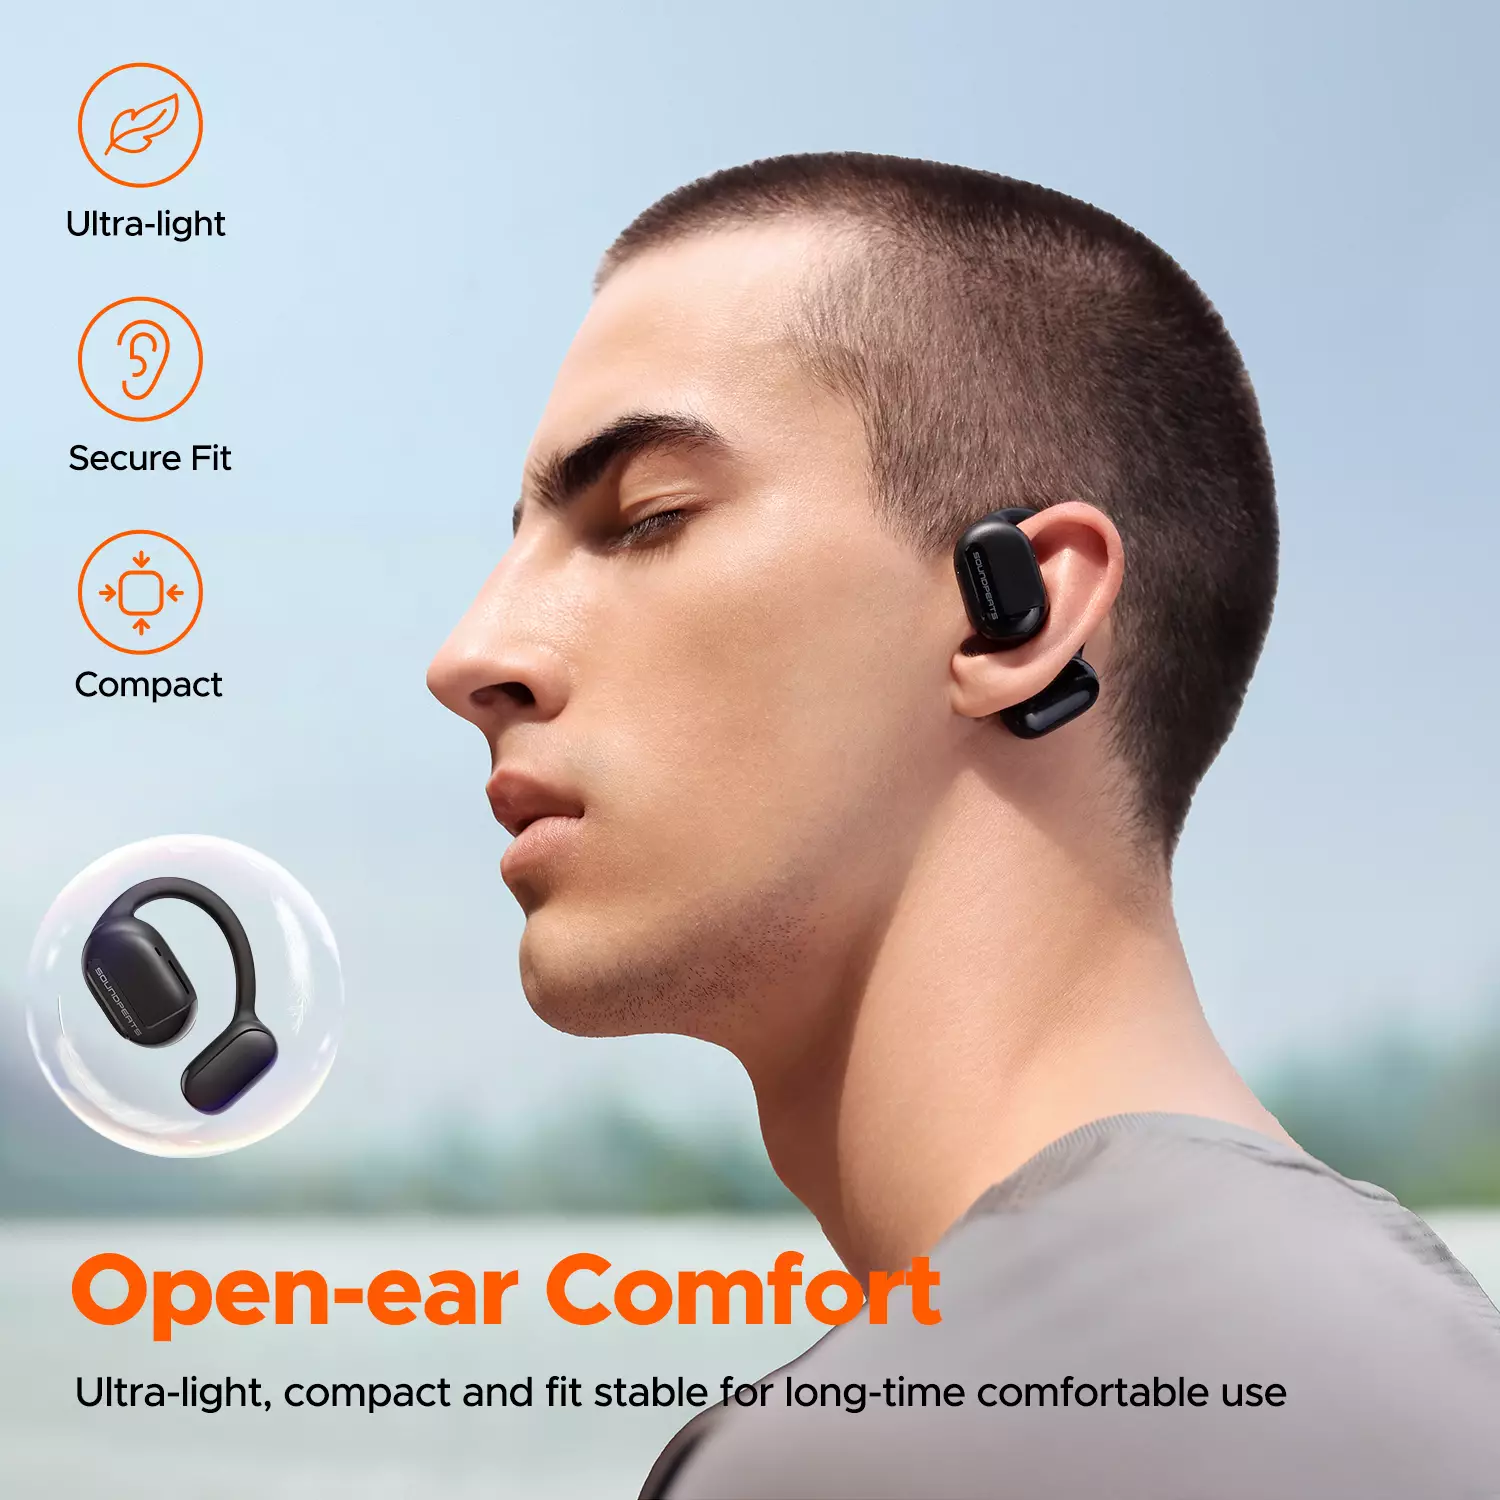 Soundpeats GoFree Open Ear Extreme Comfort Delivery all over Pakistan.